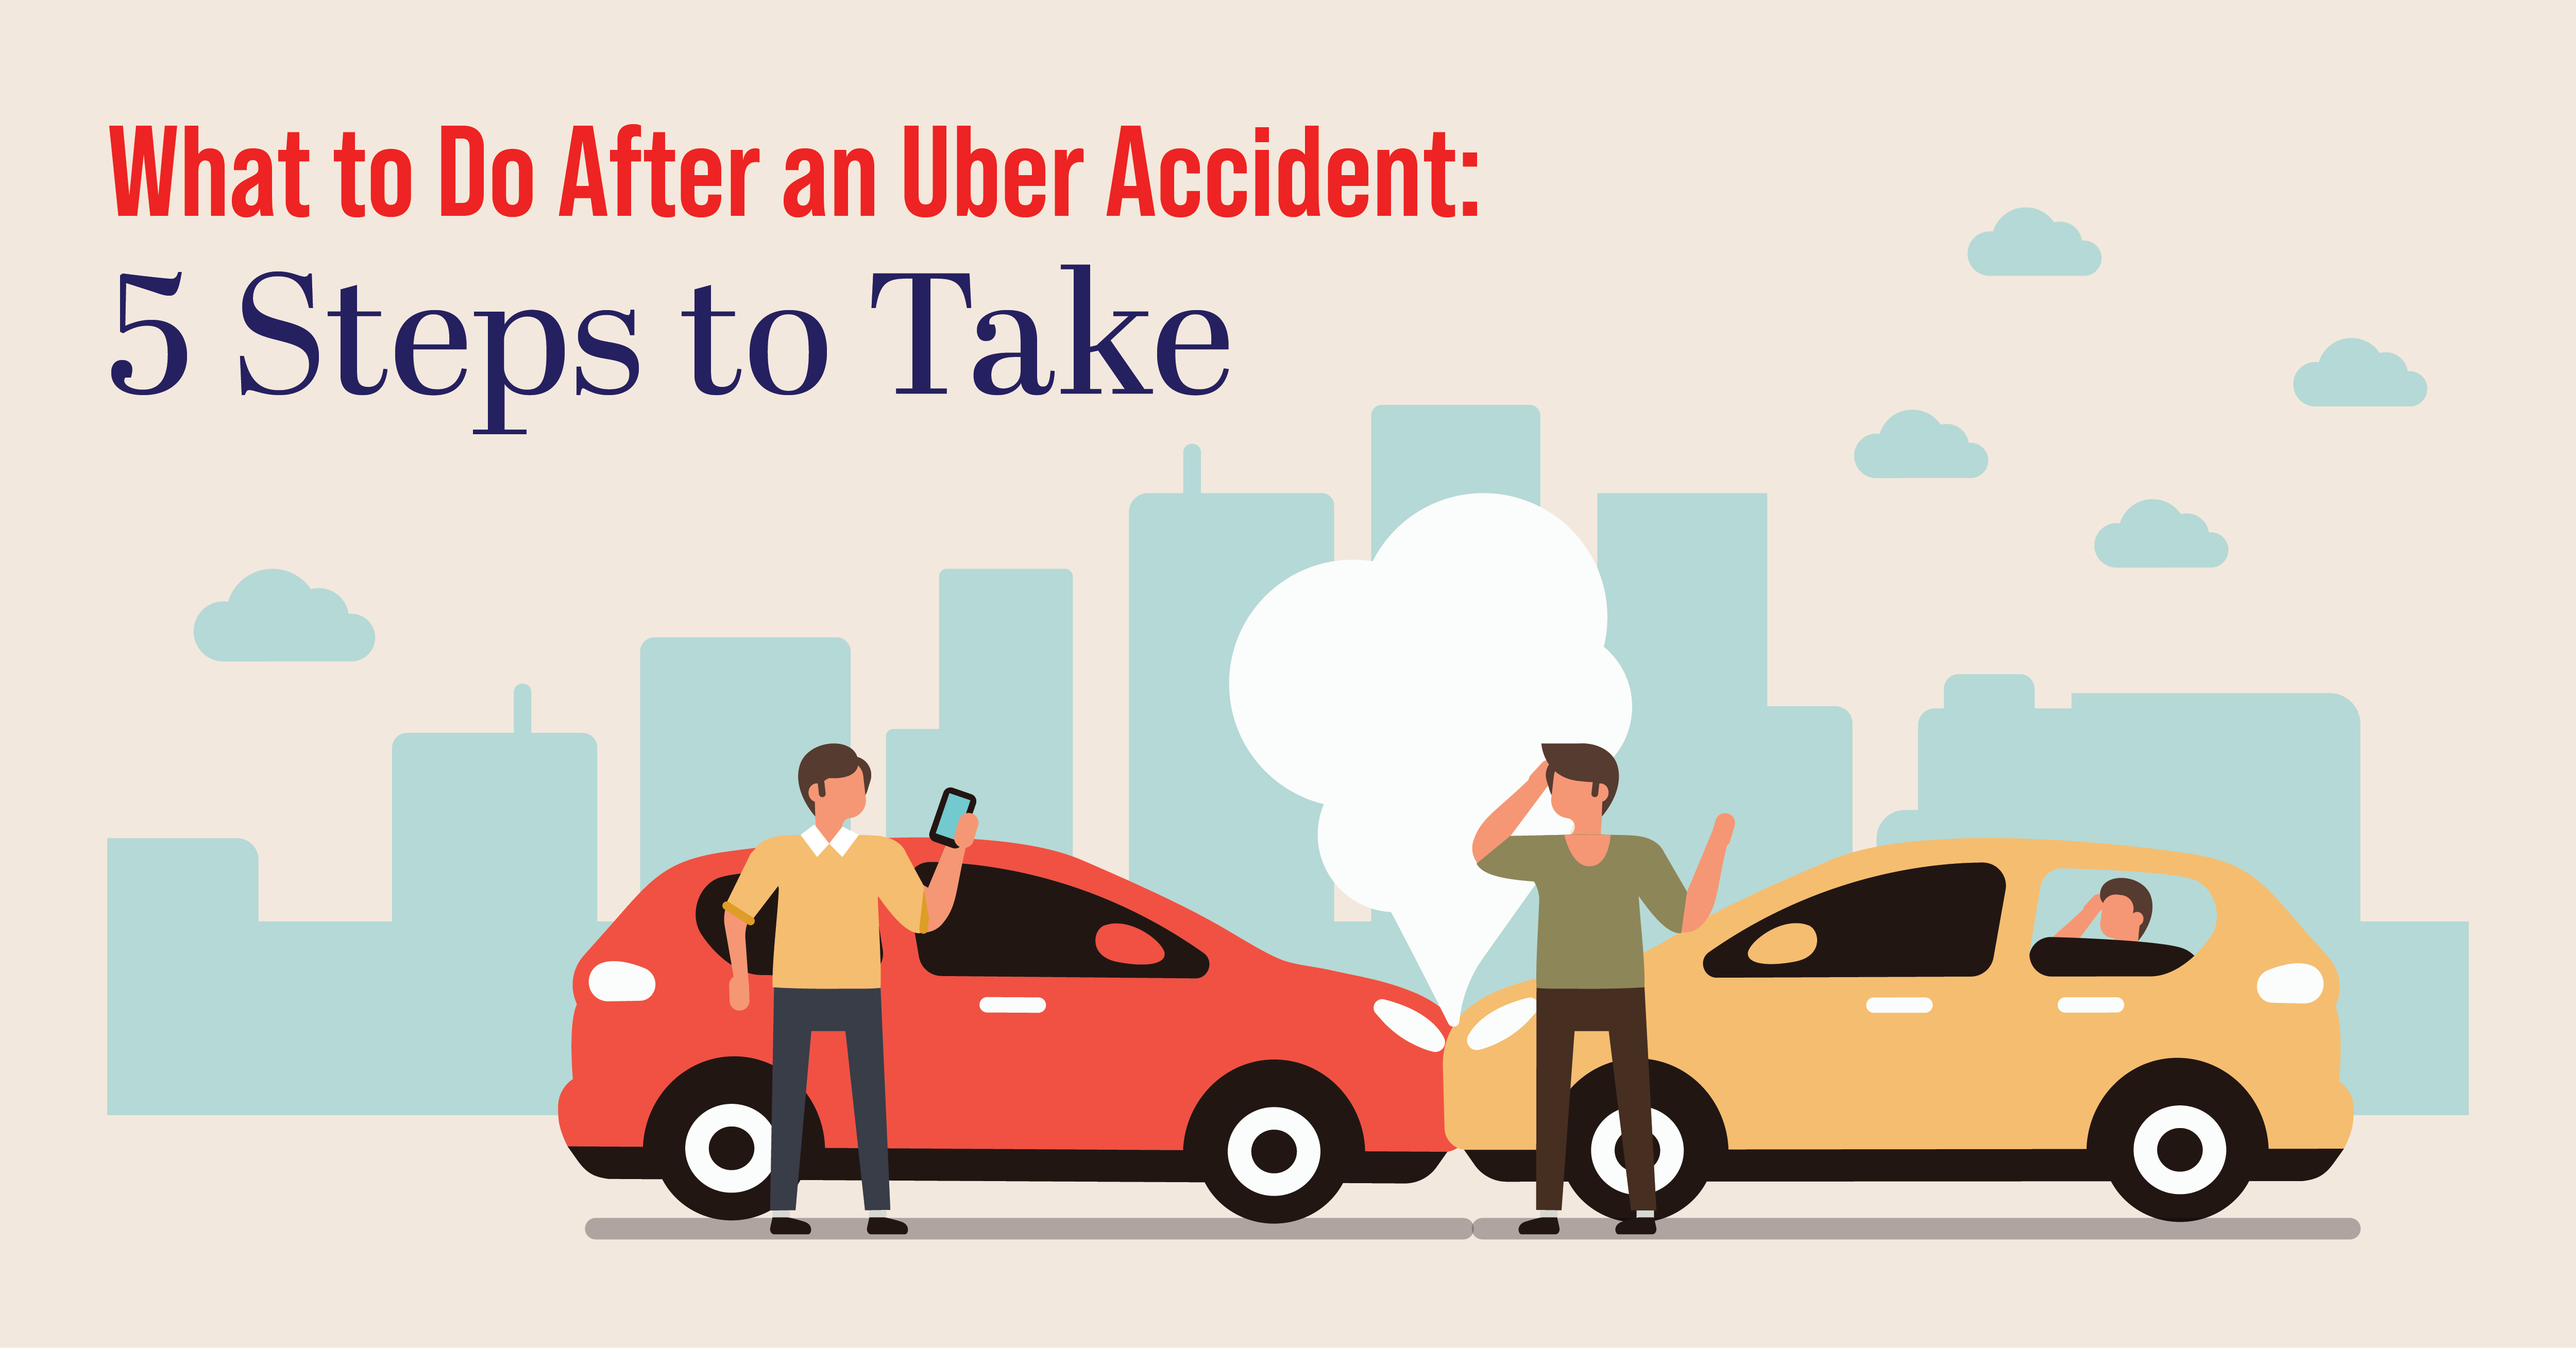 What to Do After an Uber Accident: 5 Steps to Take